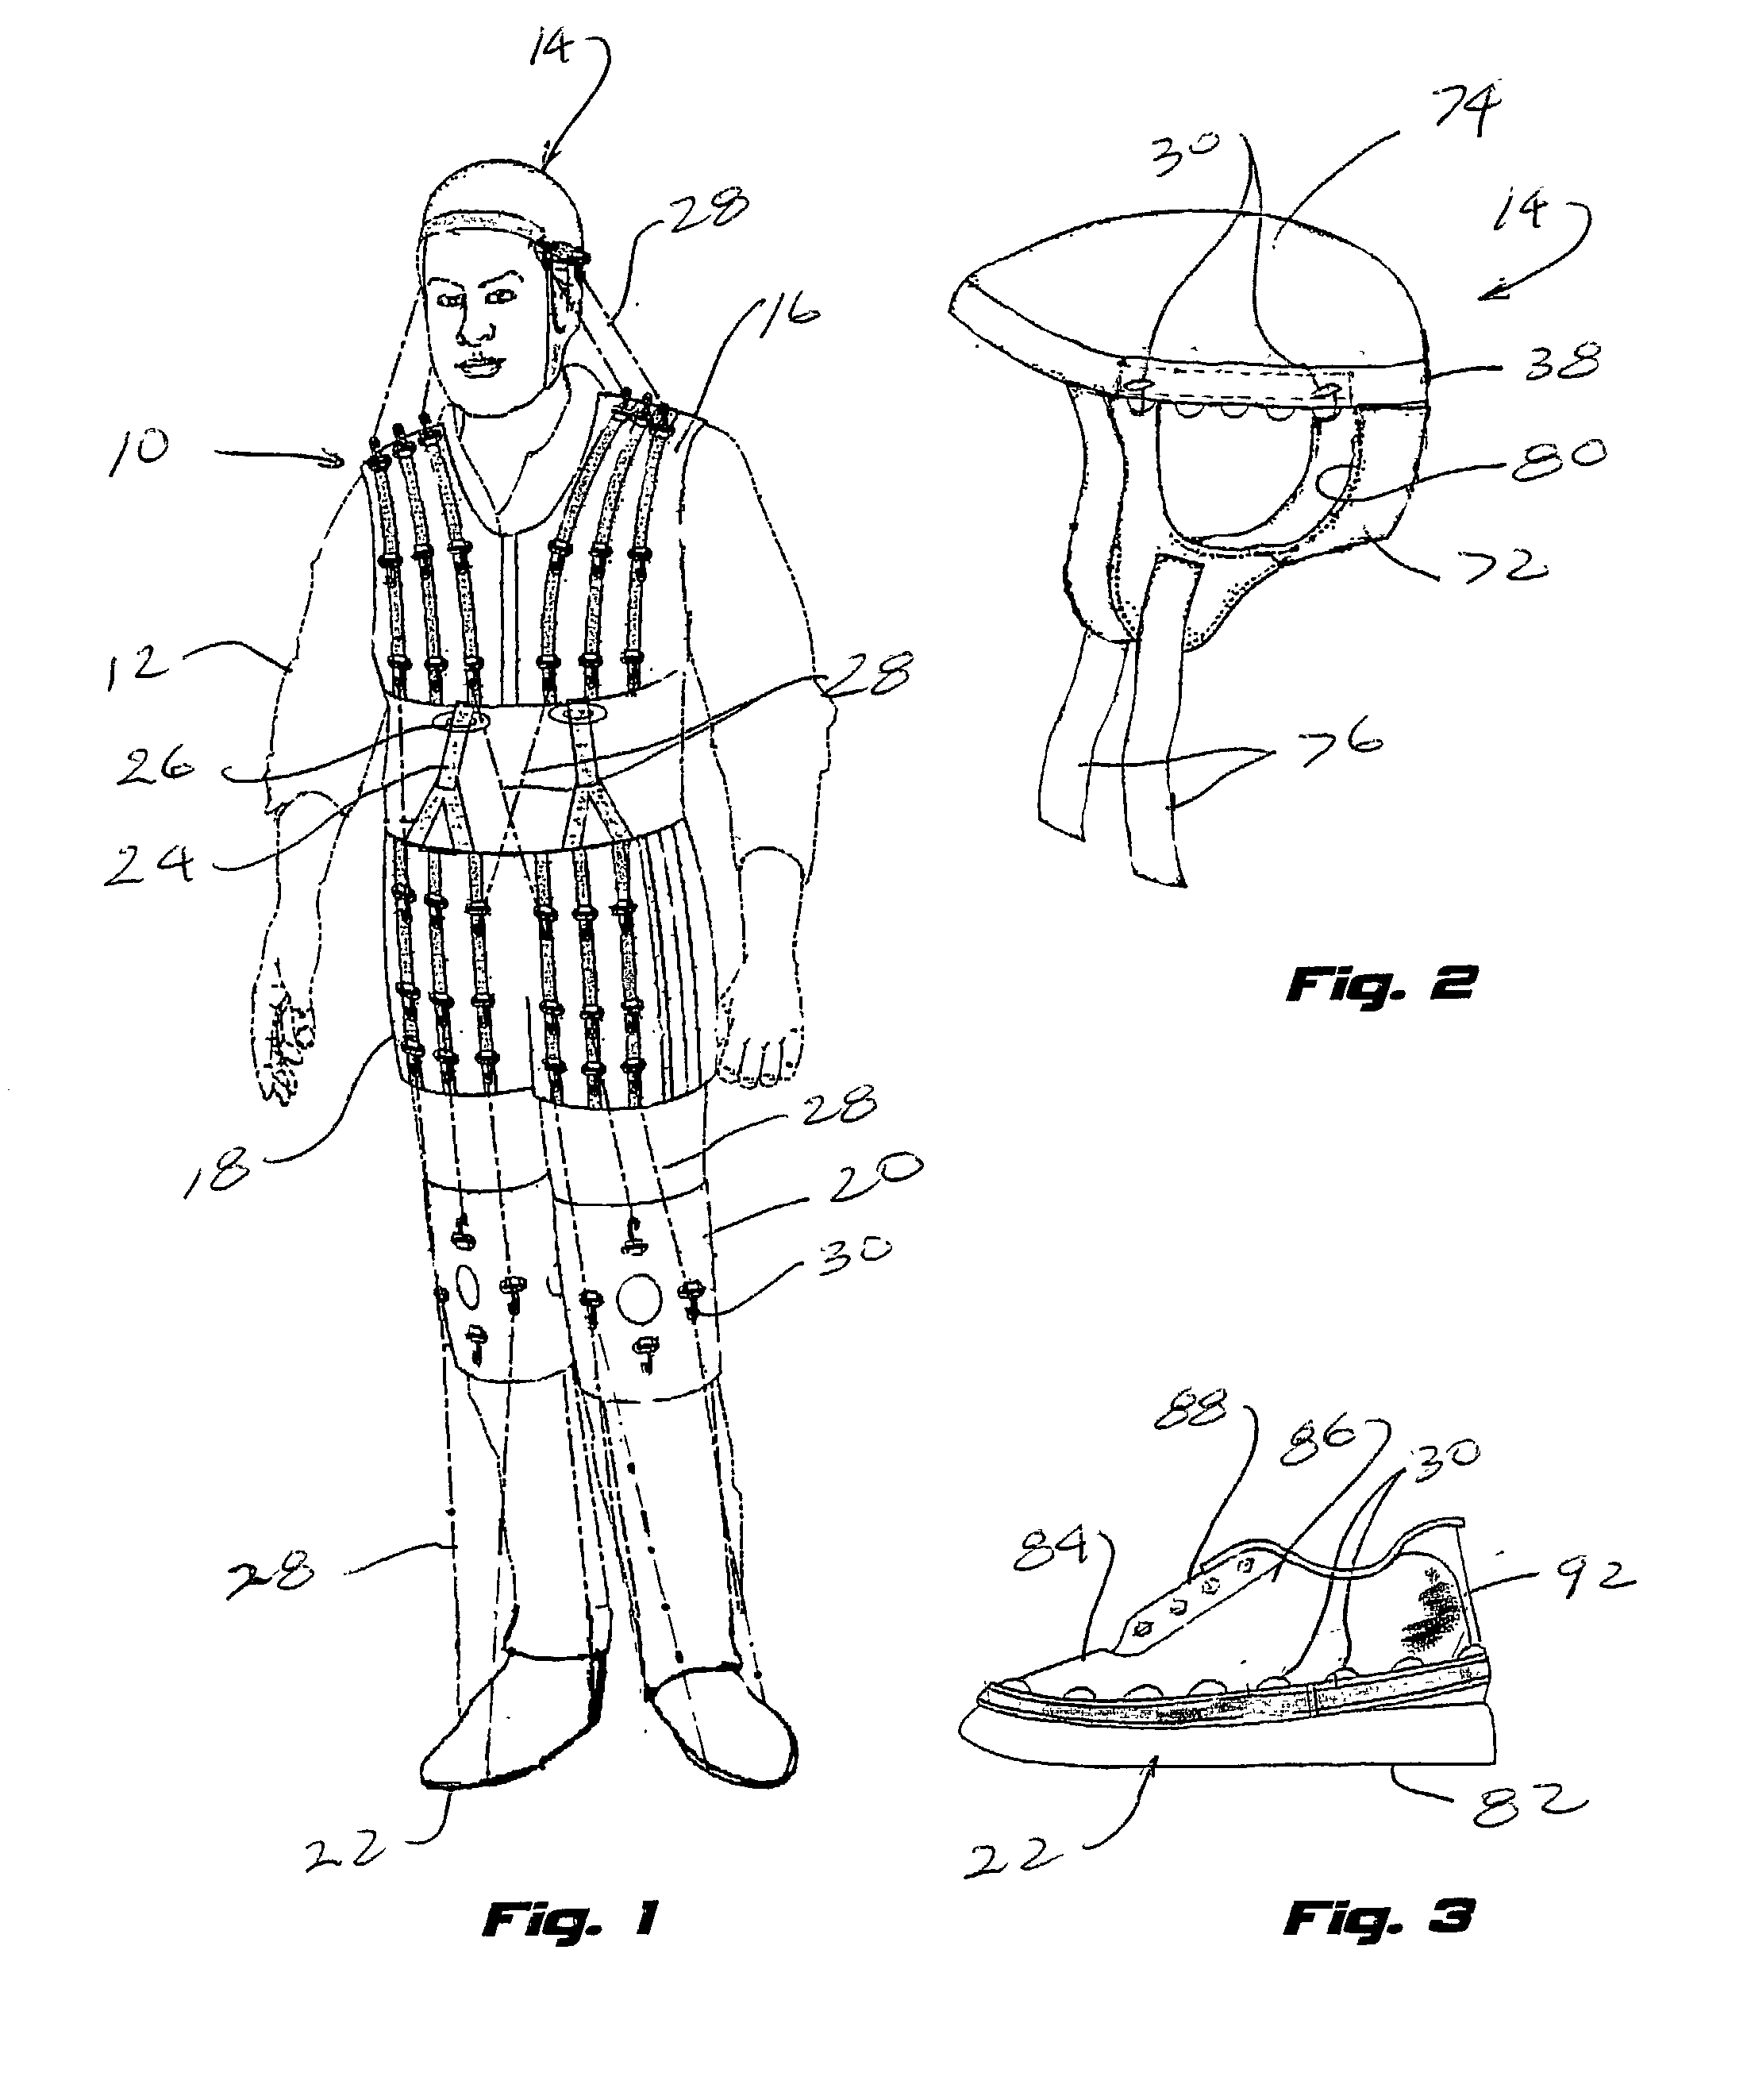 Neurological motor therapy suit